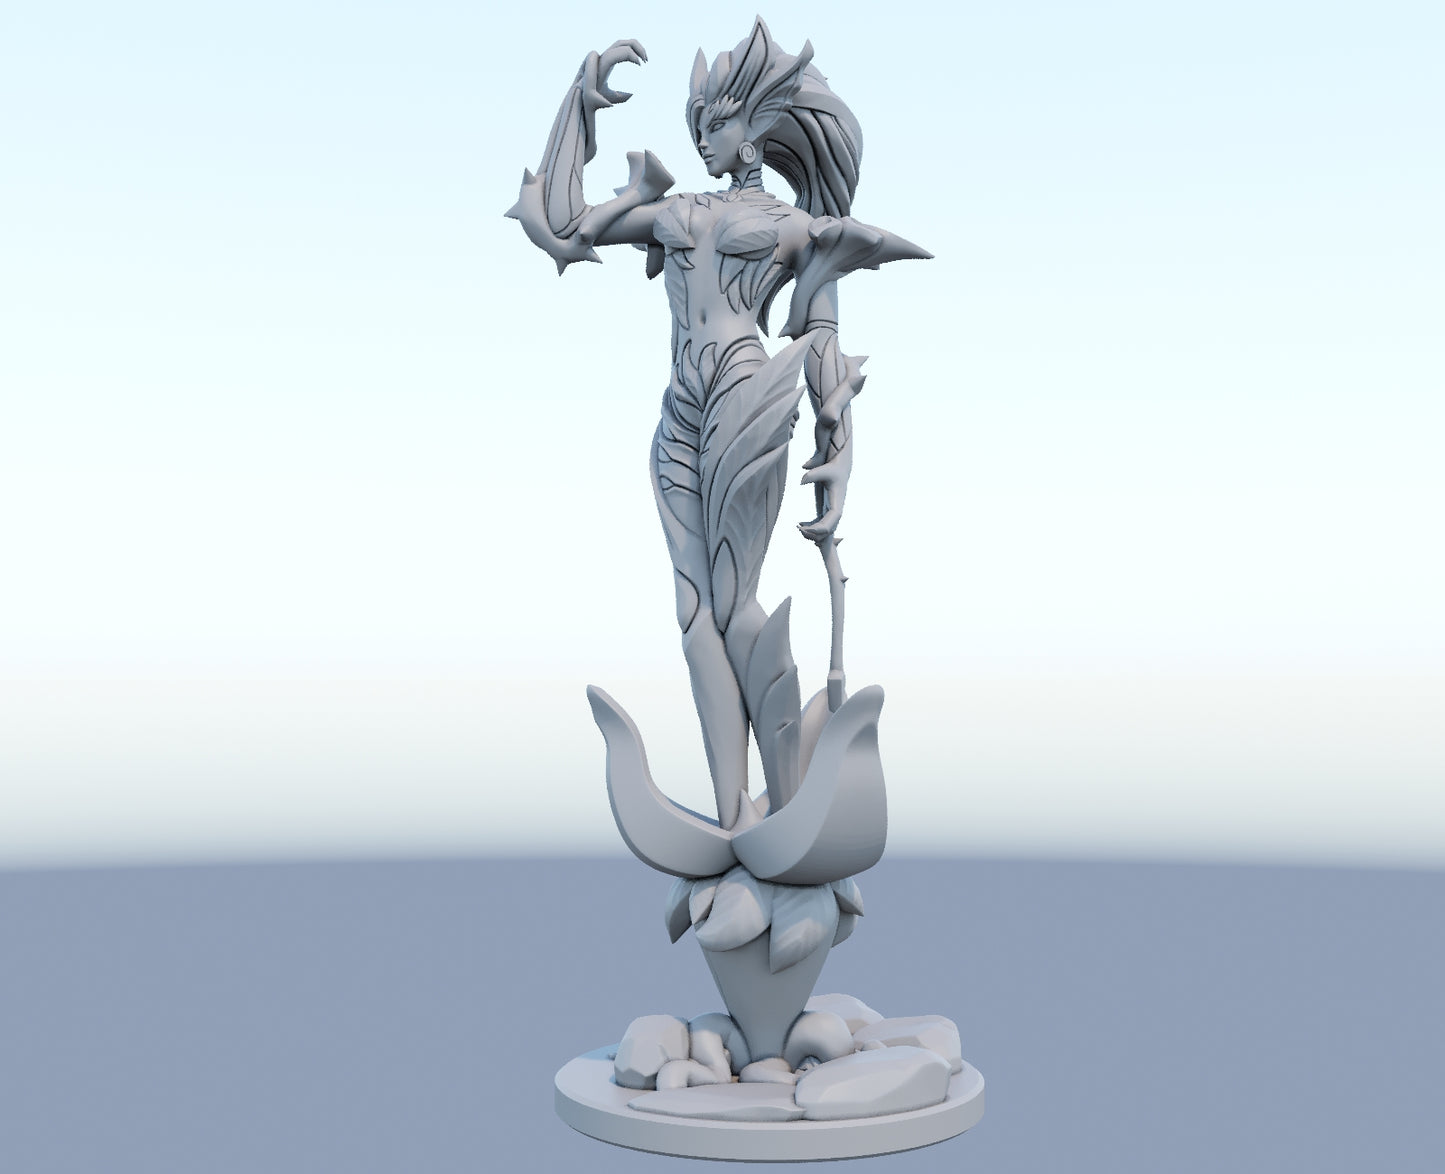 Zyra 3D-printed League of Legends champion figure. Decorate your gaming setup or home with your favorite League of Legends champion! Choose between the unpainted version, perfect for you to paint yourself, or the hand-painted version by a professional painter. Order your figure today!